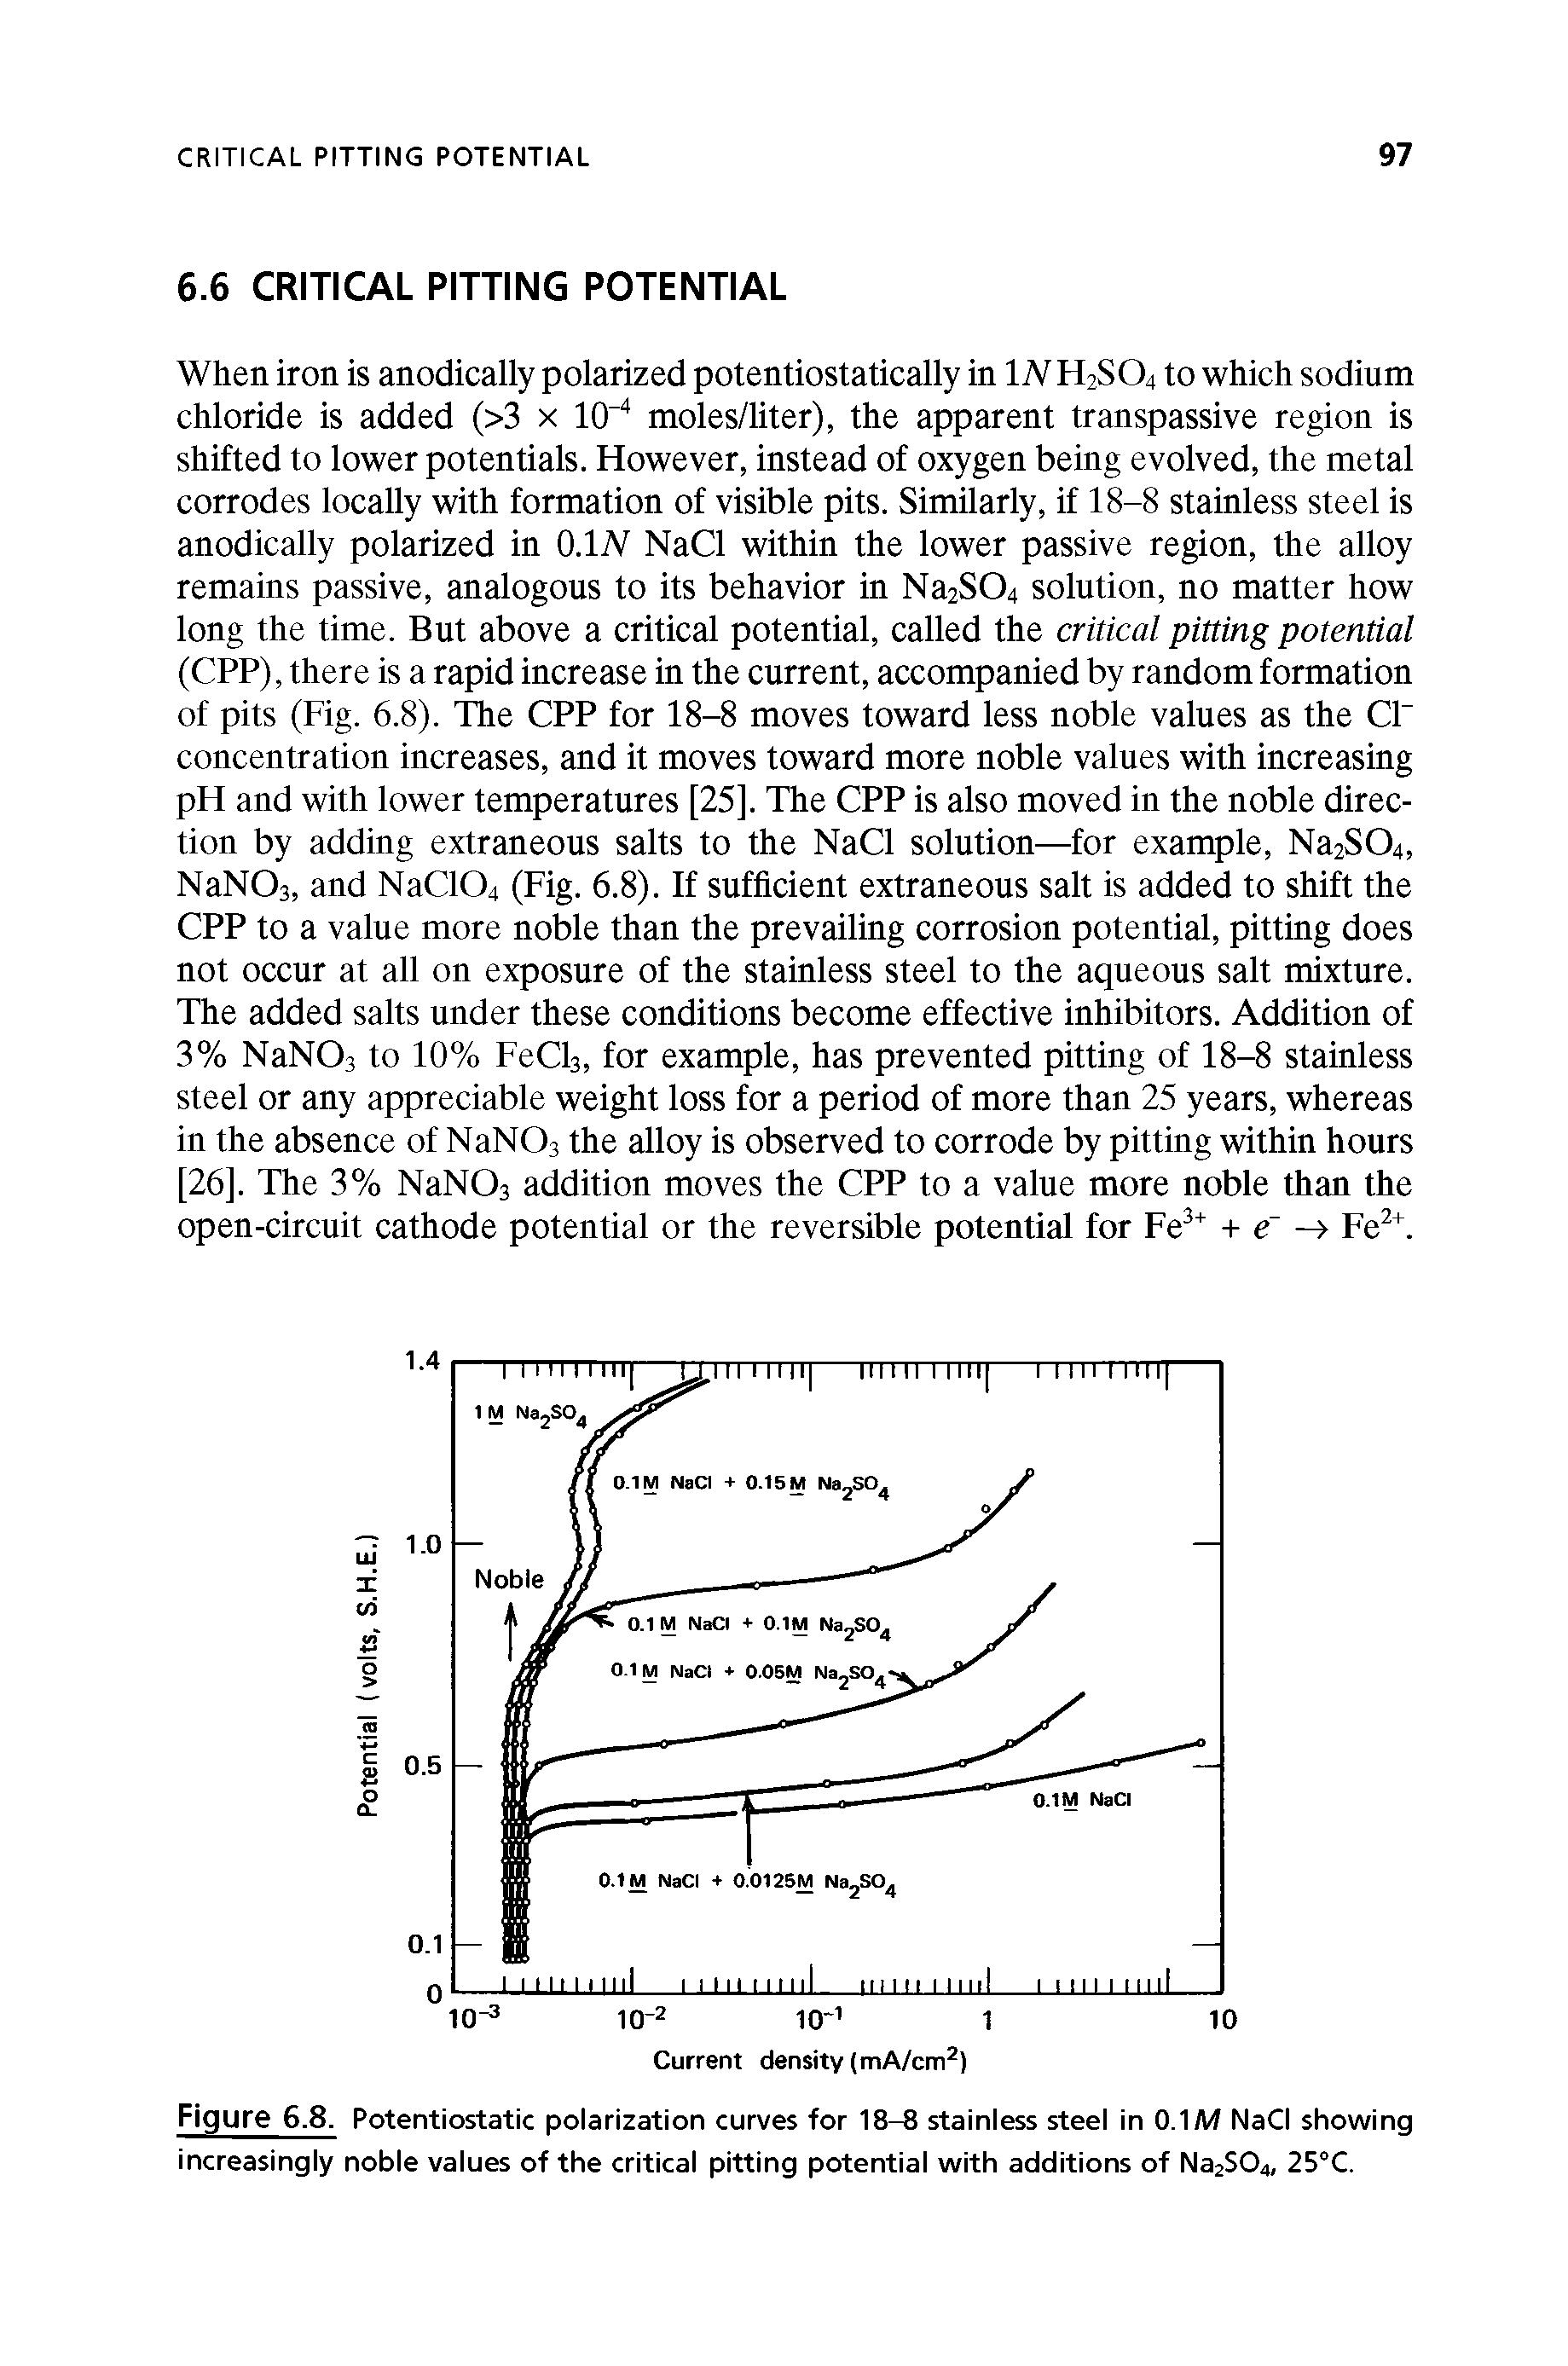 Figure 6.8. Potentiostatic polarization curves for 18-8 stainless steel in 0.1W NaCl showing increasingly noble values of the critical pitting potential with additions of Na2S04, 25°C.